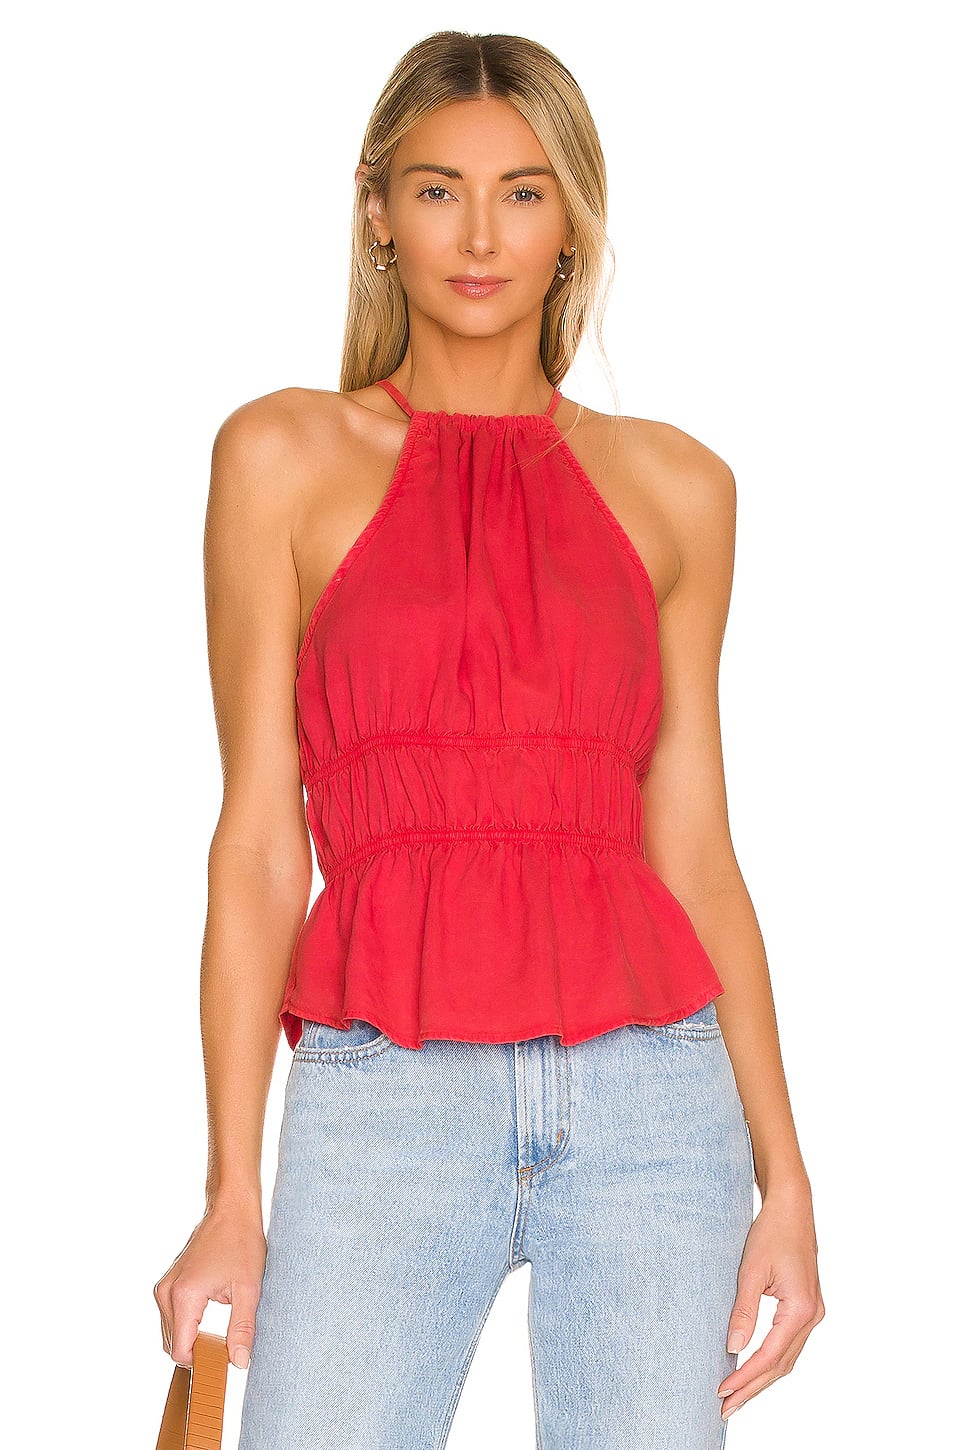 Best Tops For Small Busts, 2023 Guide